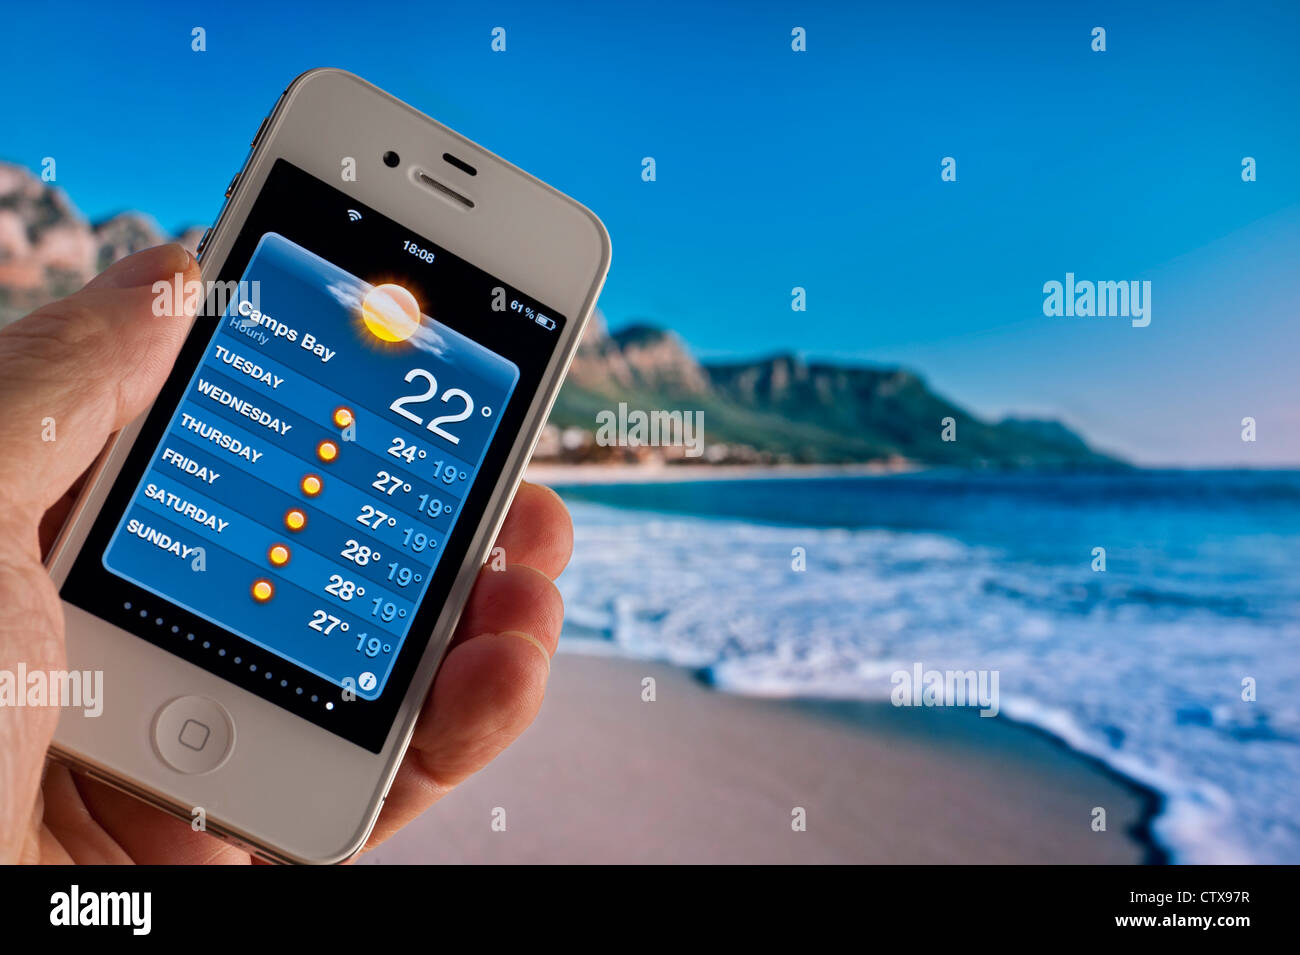 Apple iPhone 4s displaying 22C morning sun on weather forecast application at Camps Bay Capetown South Africa Stock Photo